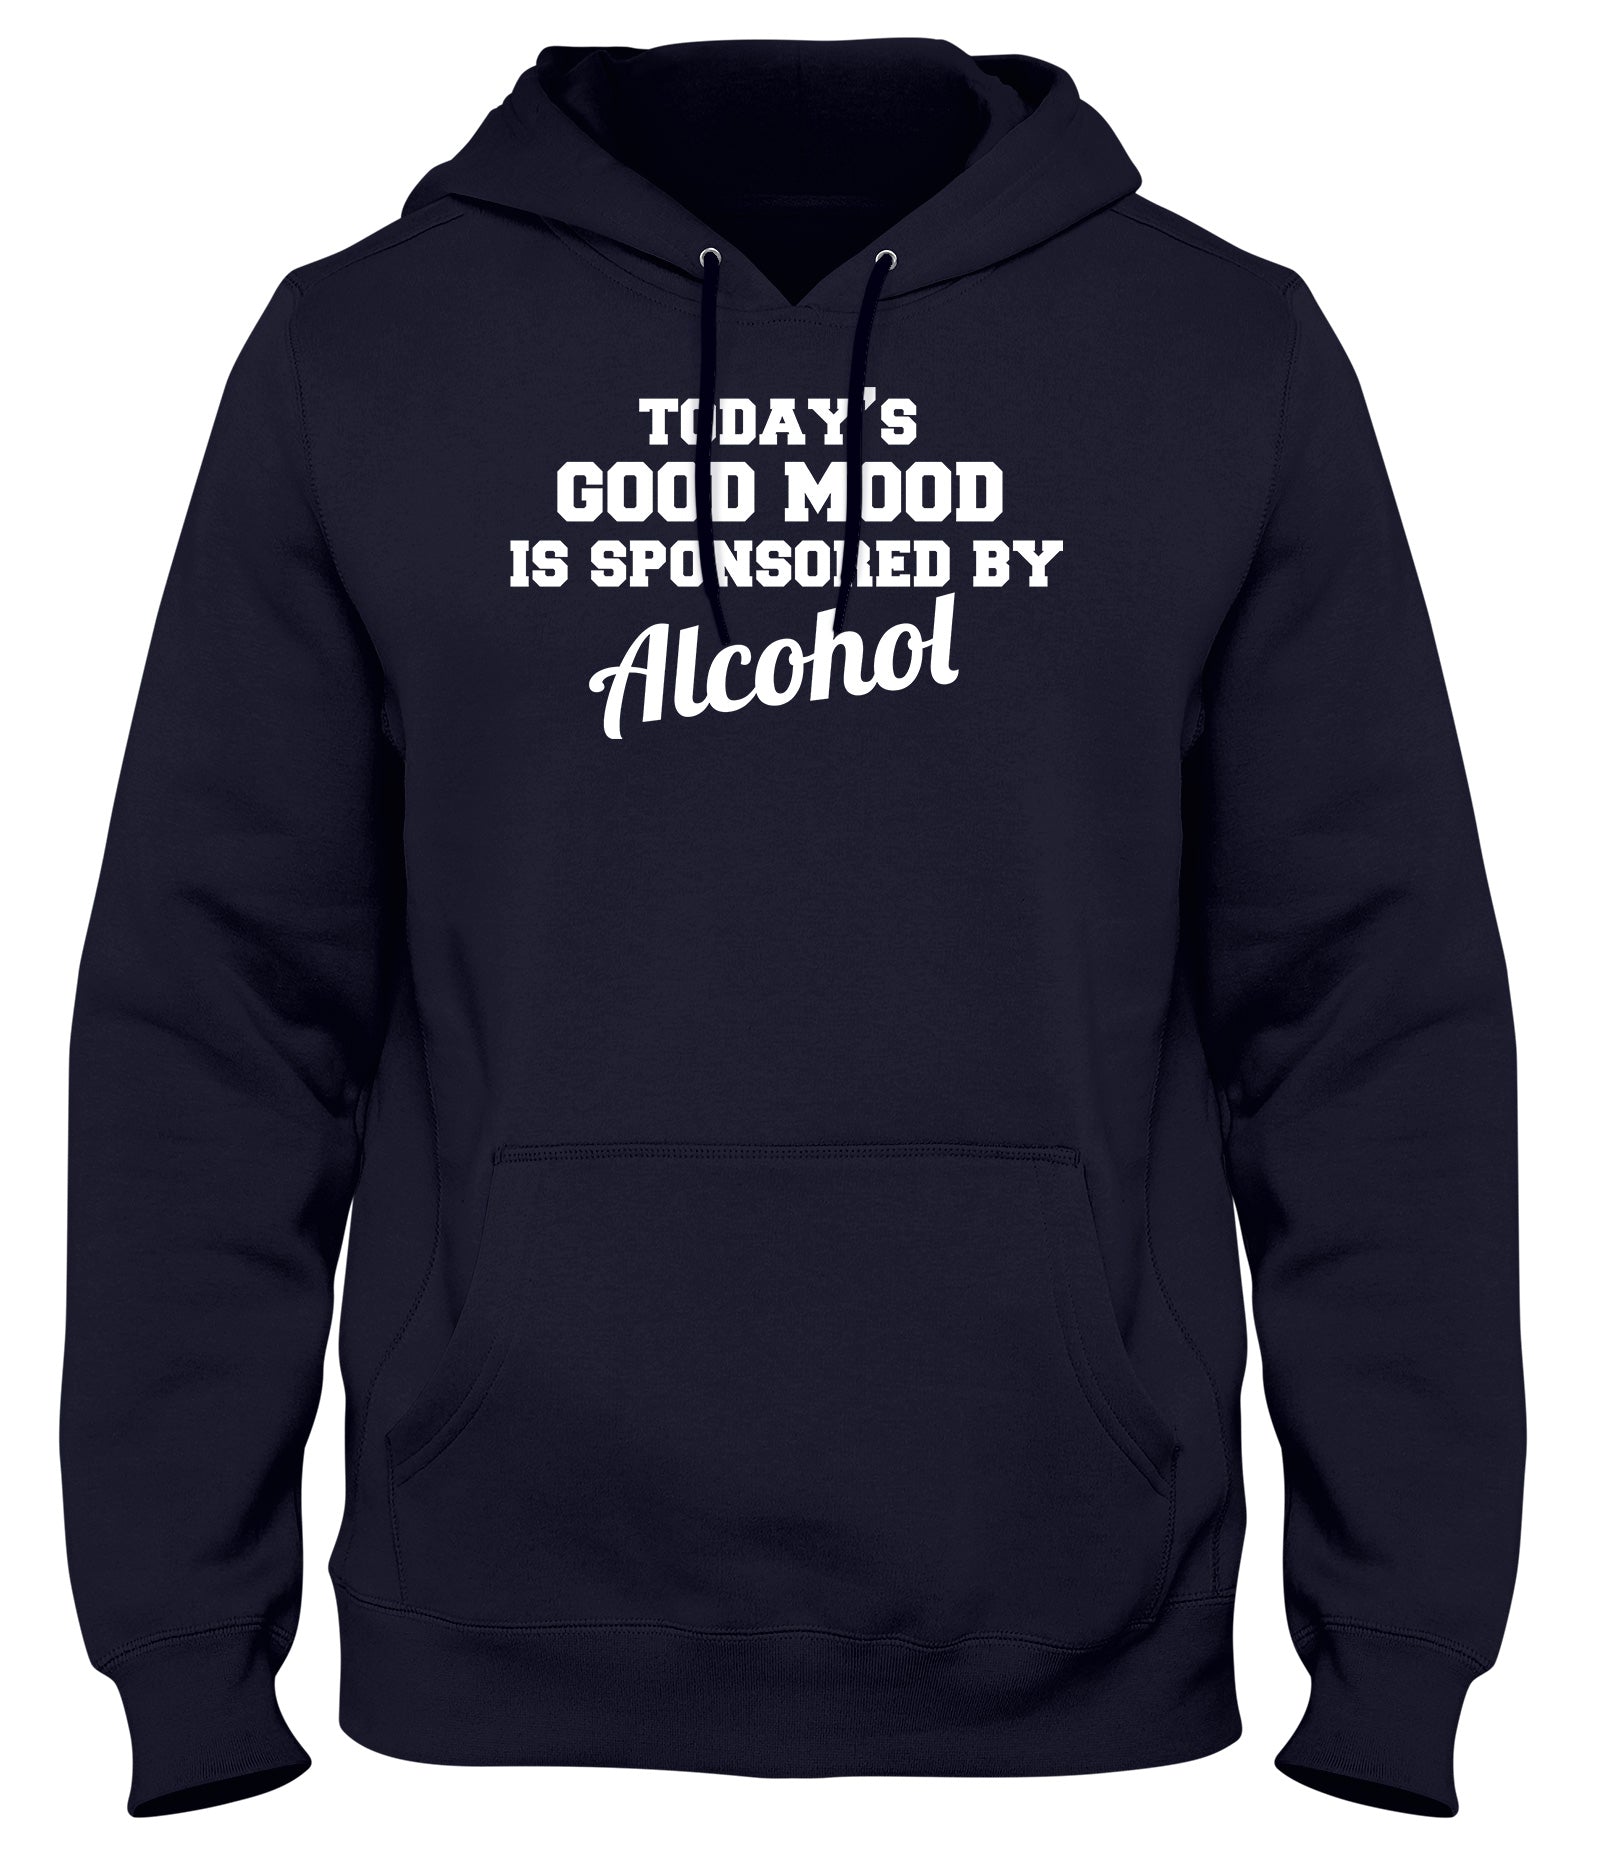 TODAY'S GOOD MOOD IS SPONSORED BY ALCOHOL WOMENS LADIES MENS UNISEX HOODIE